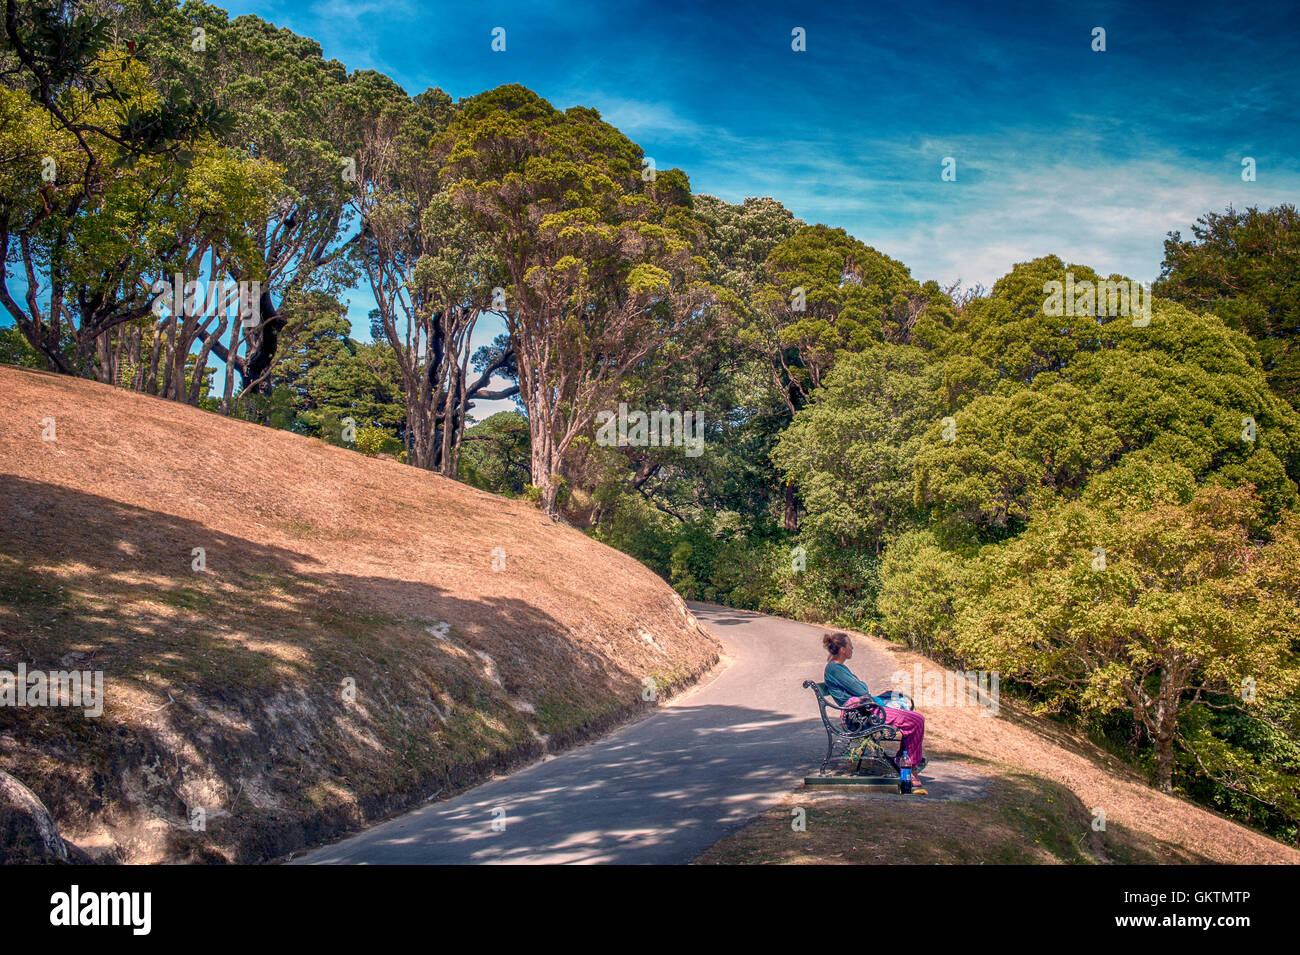 Wellington, New Zealand - March 2, 2016: People resting at Wellington Botanic Garden, the largest public park in town Stock Photo